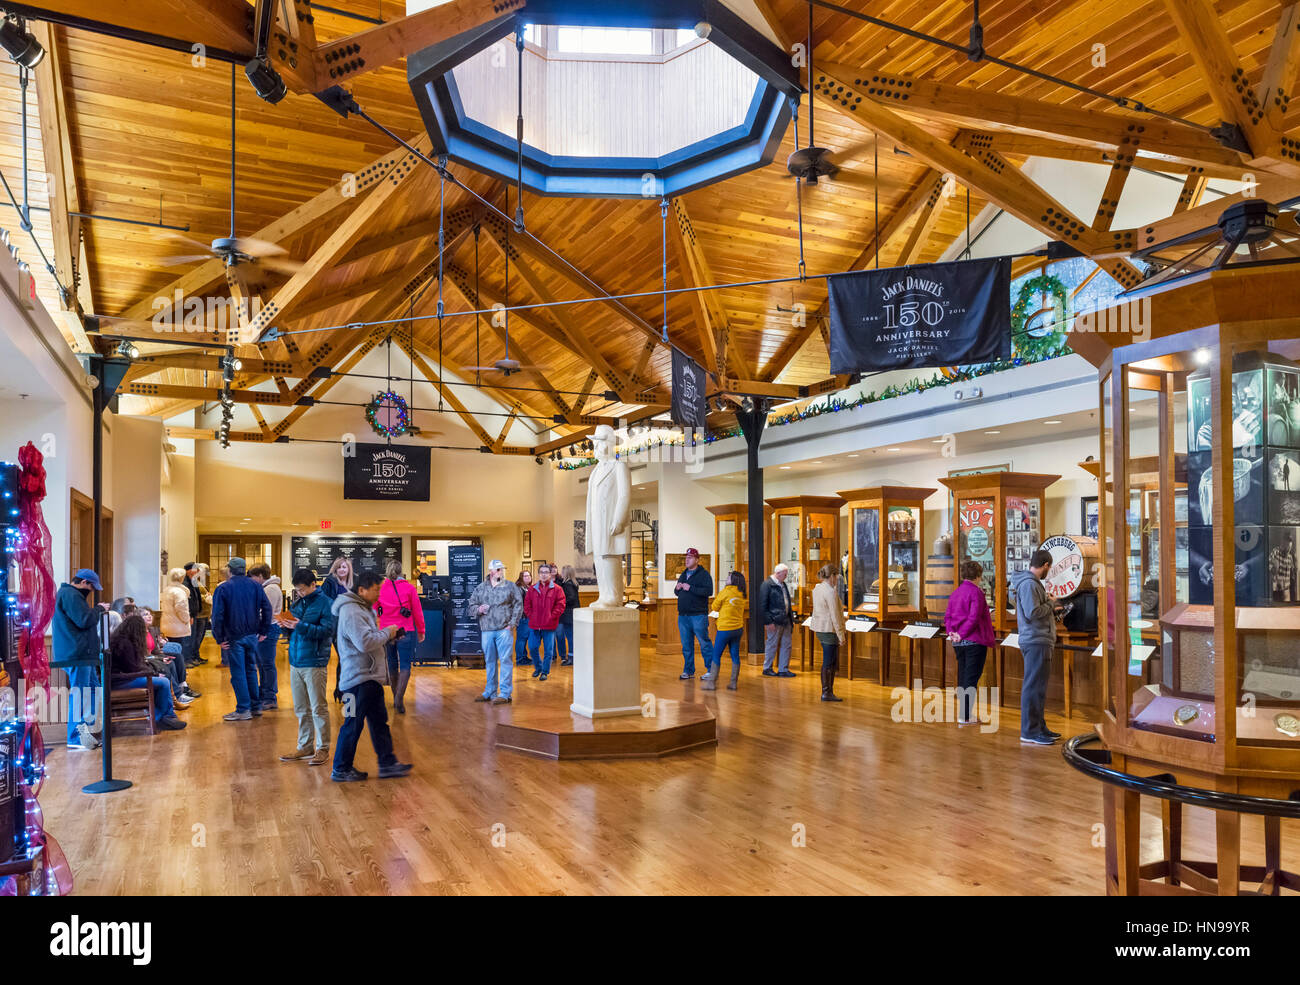 Jack Daniels Distillery. The Visitor Center at the Jack Daniels Distillery in Lynchburg, Tennessee, USA Stock Photo